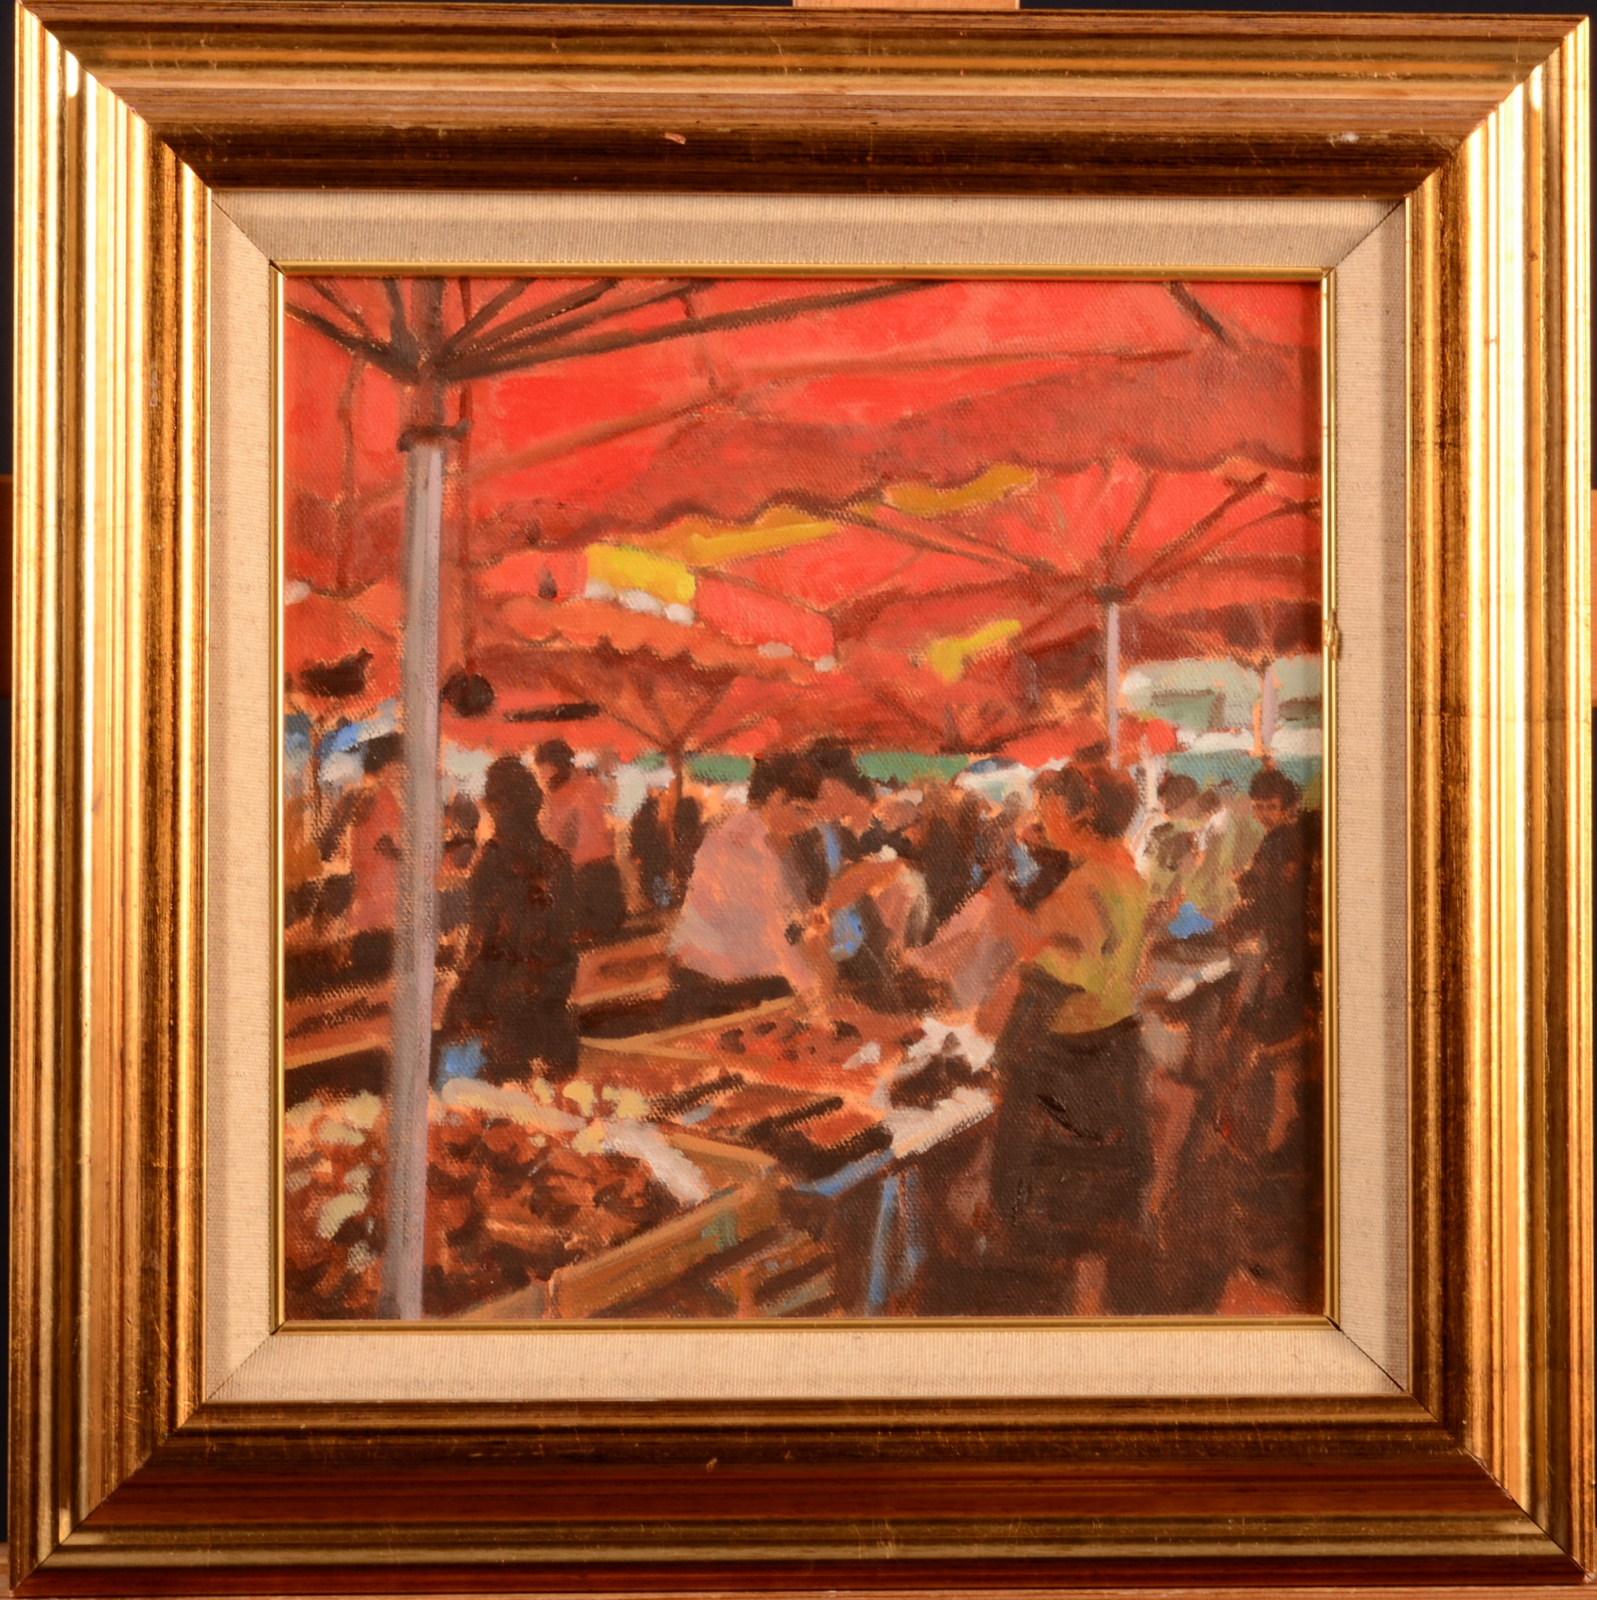 RAY DENTON A Market Stall Perigueux Oil on canvas Signed and inscribed to the back 25 x 25cm - Image 2 of 2